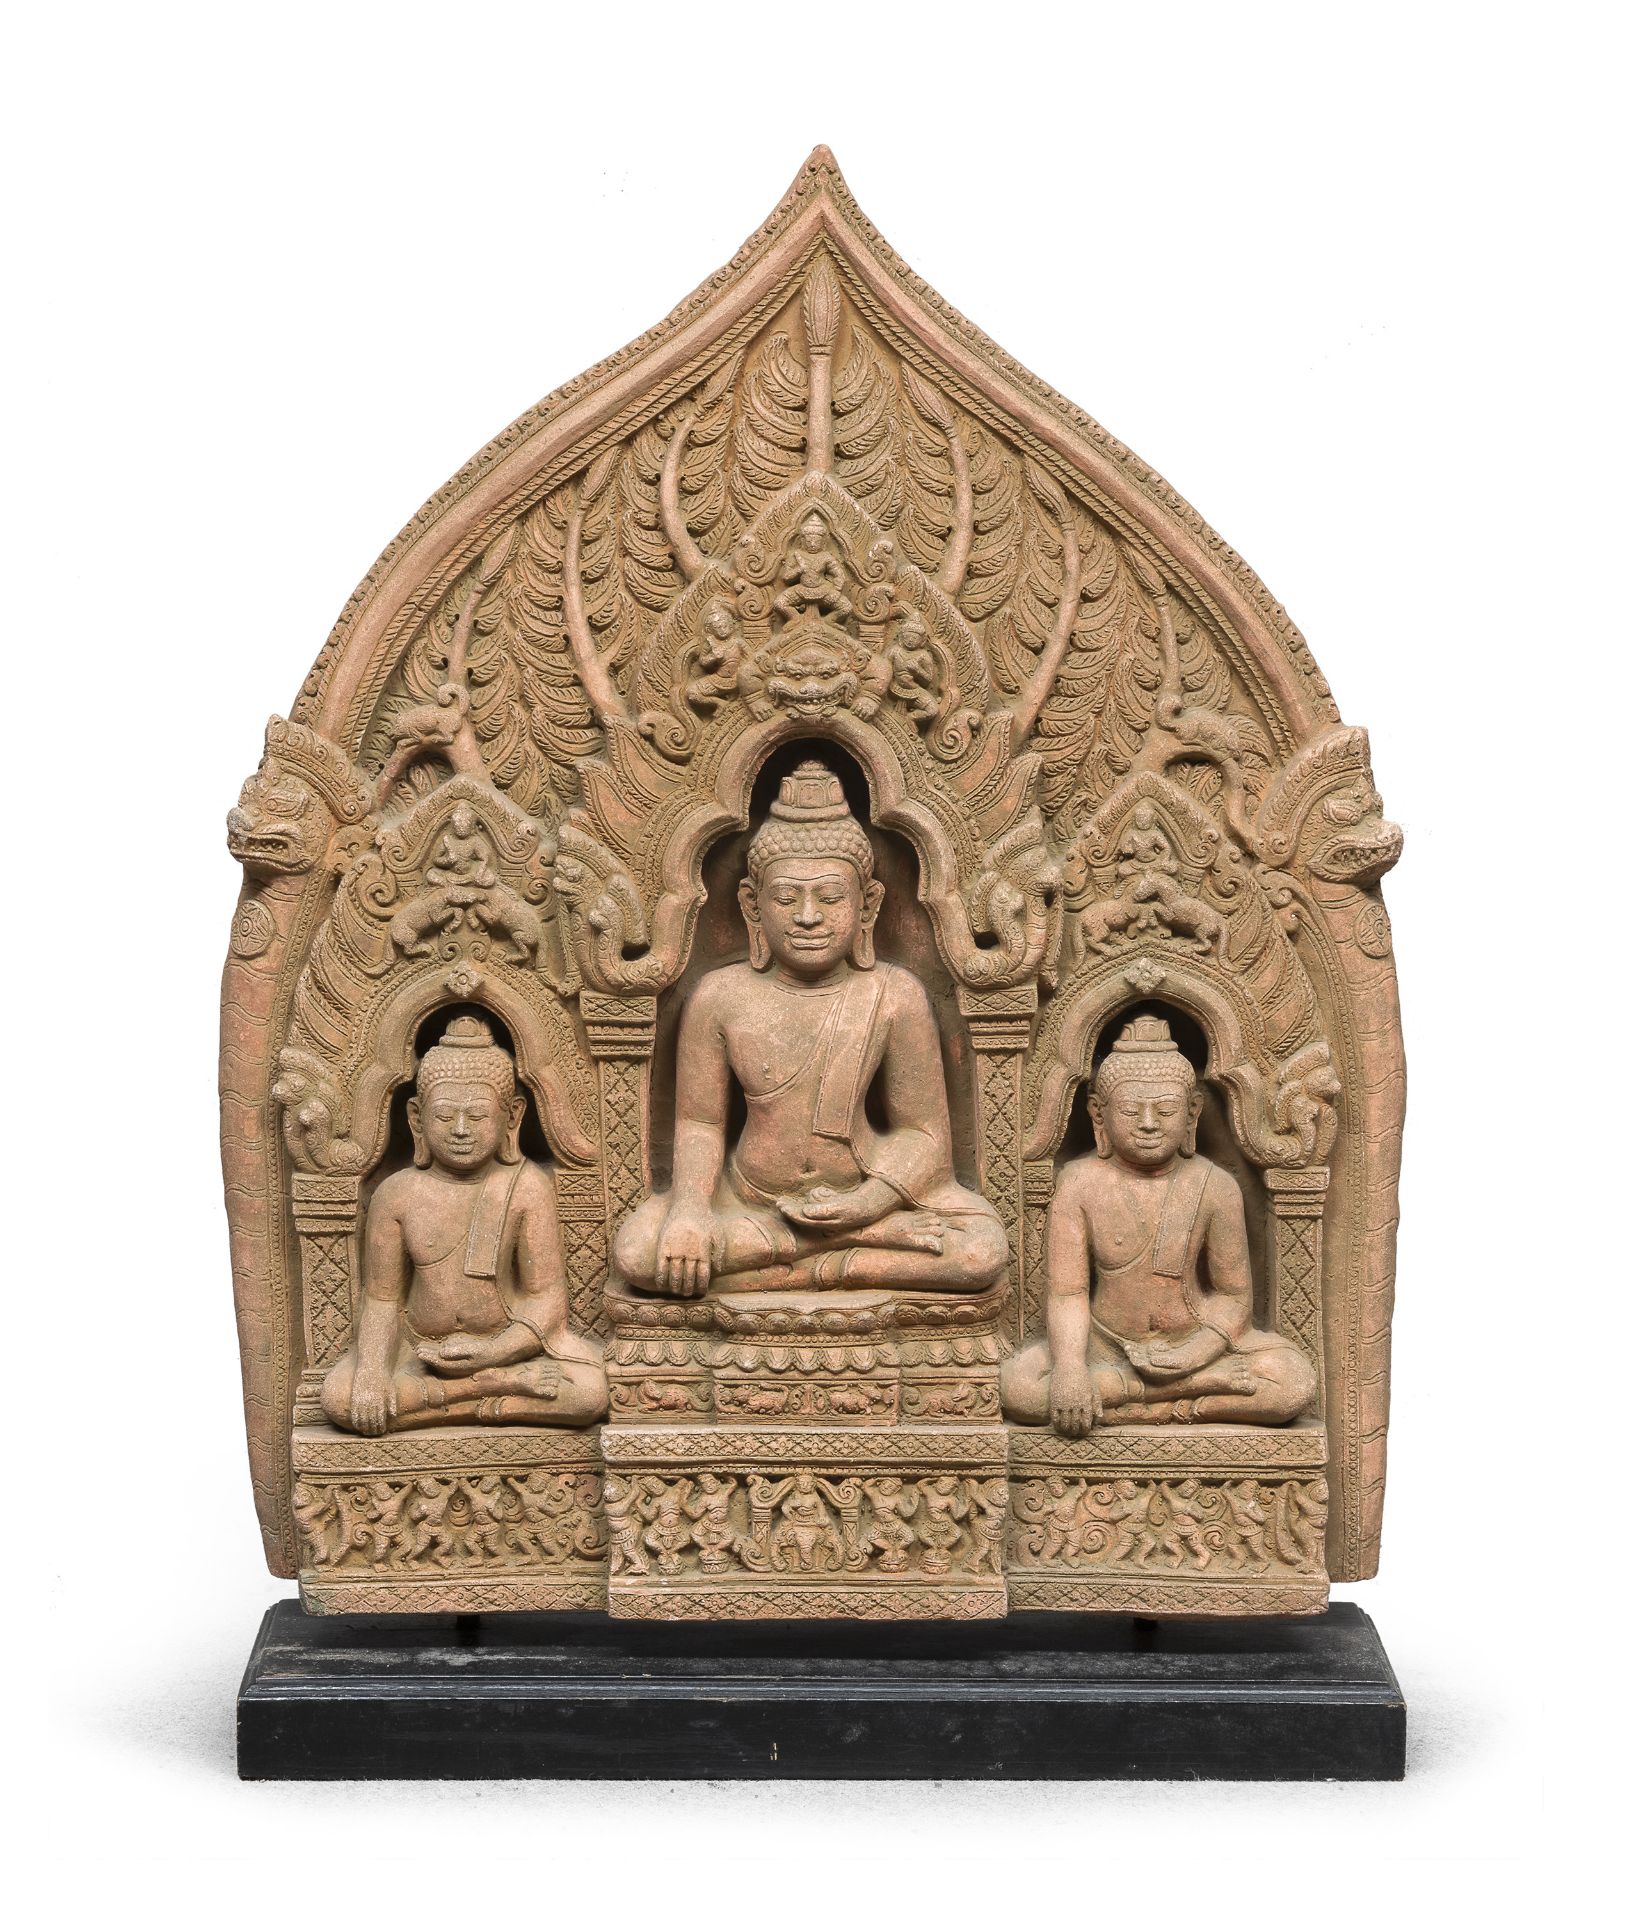 A THAI OR MALAYSIAN STONE HIGH-RELIEF. EARLY 20TH CENTURY.